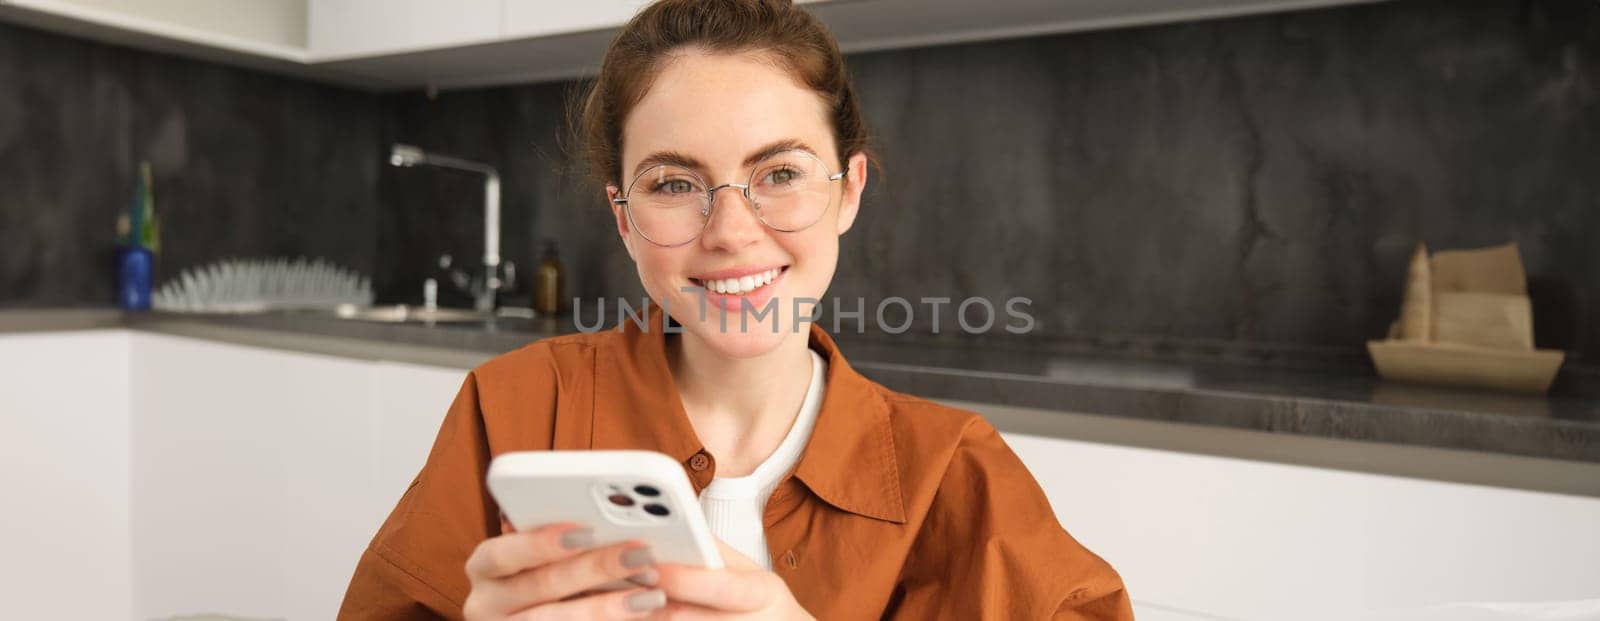 Close up portrait of smiling young woman, female model sitting in kitchen with smartphone, using mobile phone and smiling.